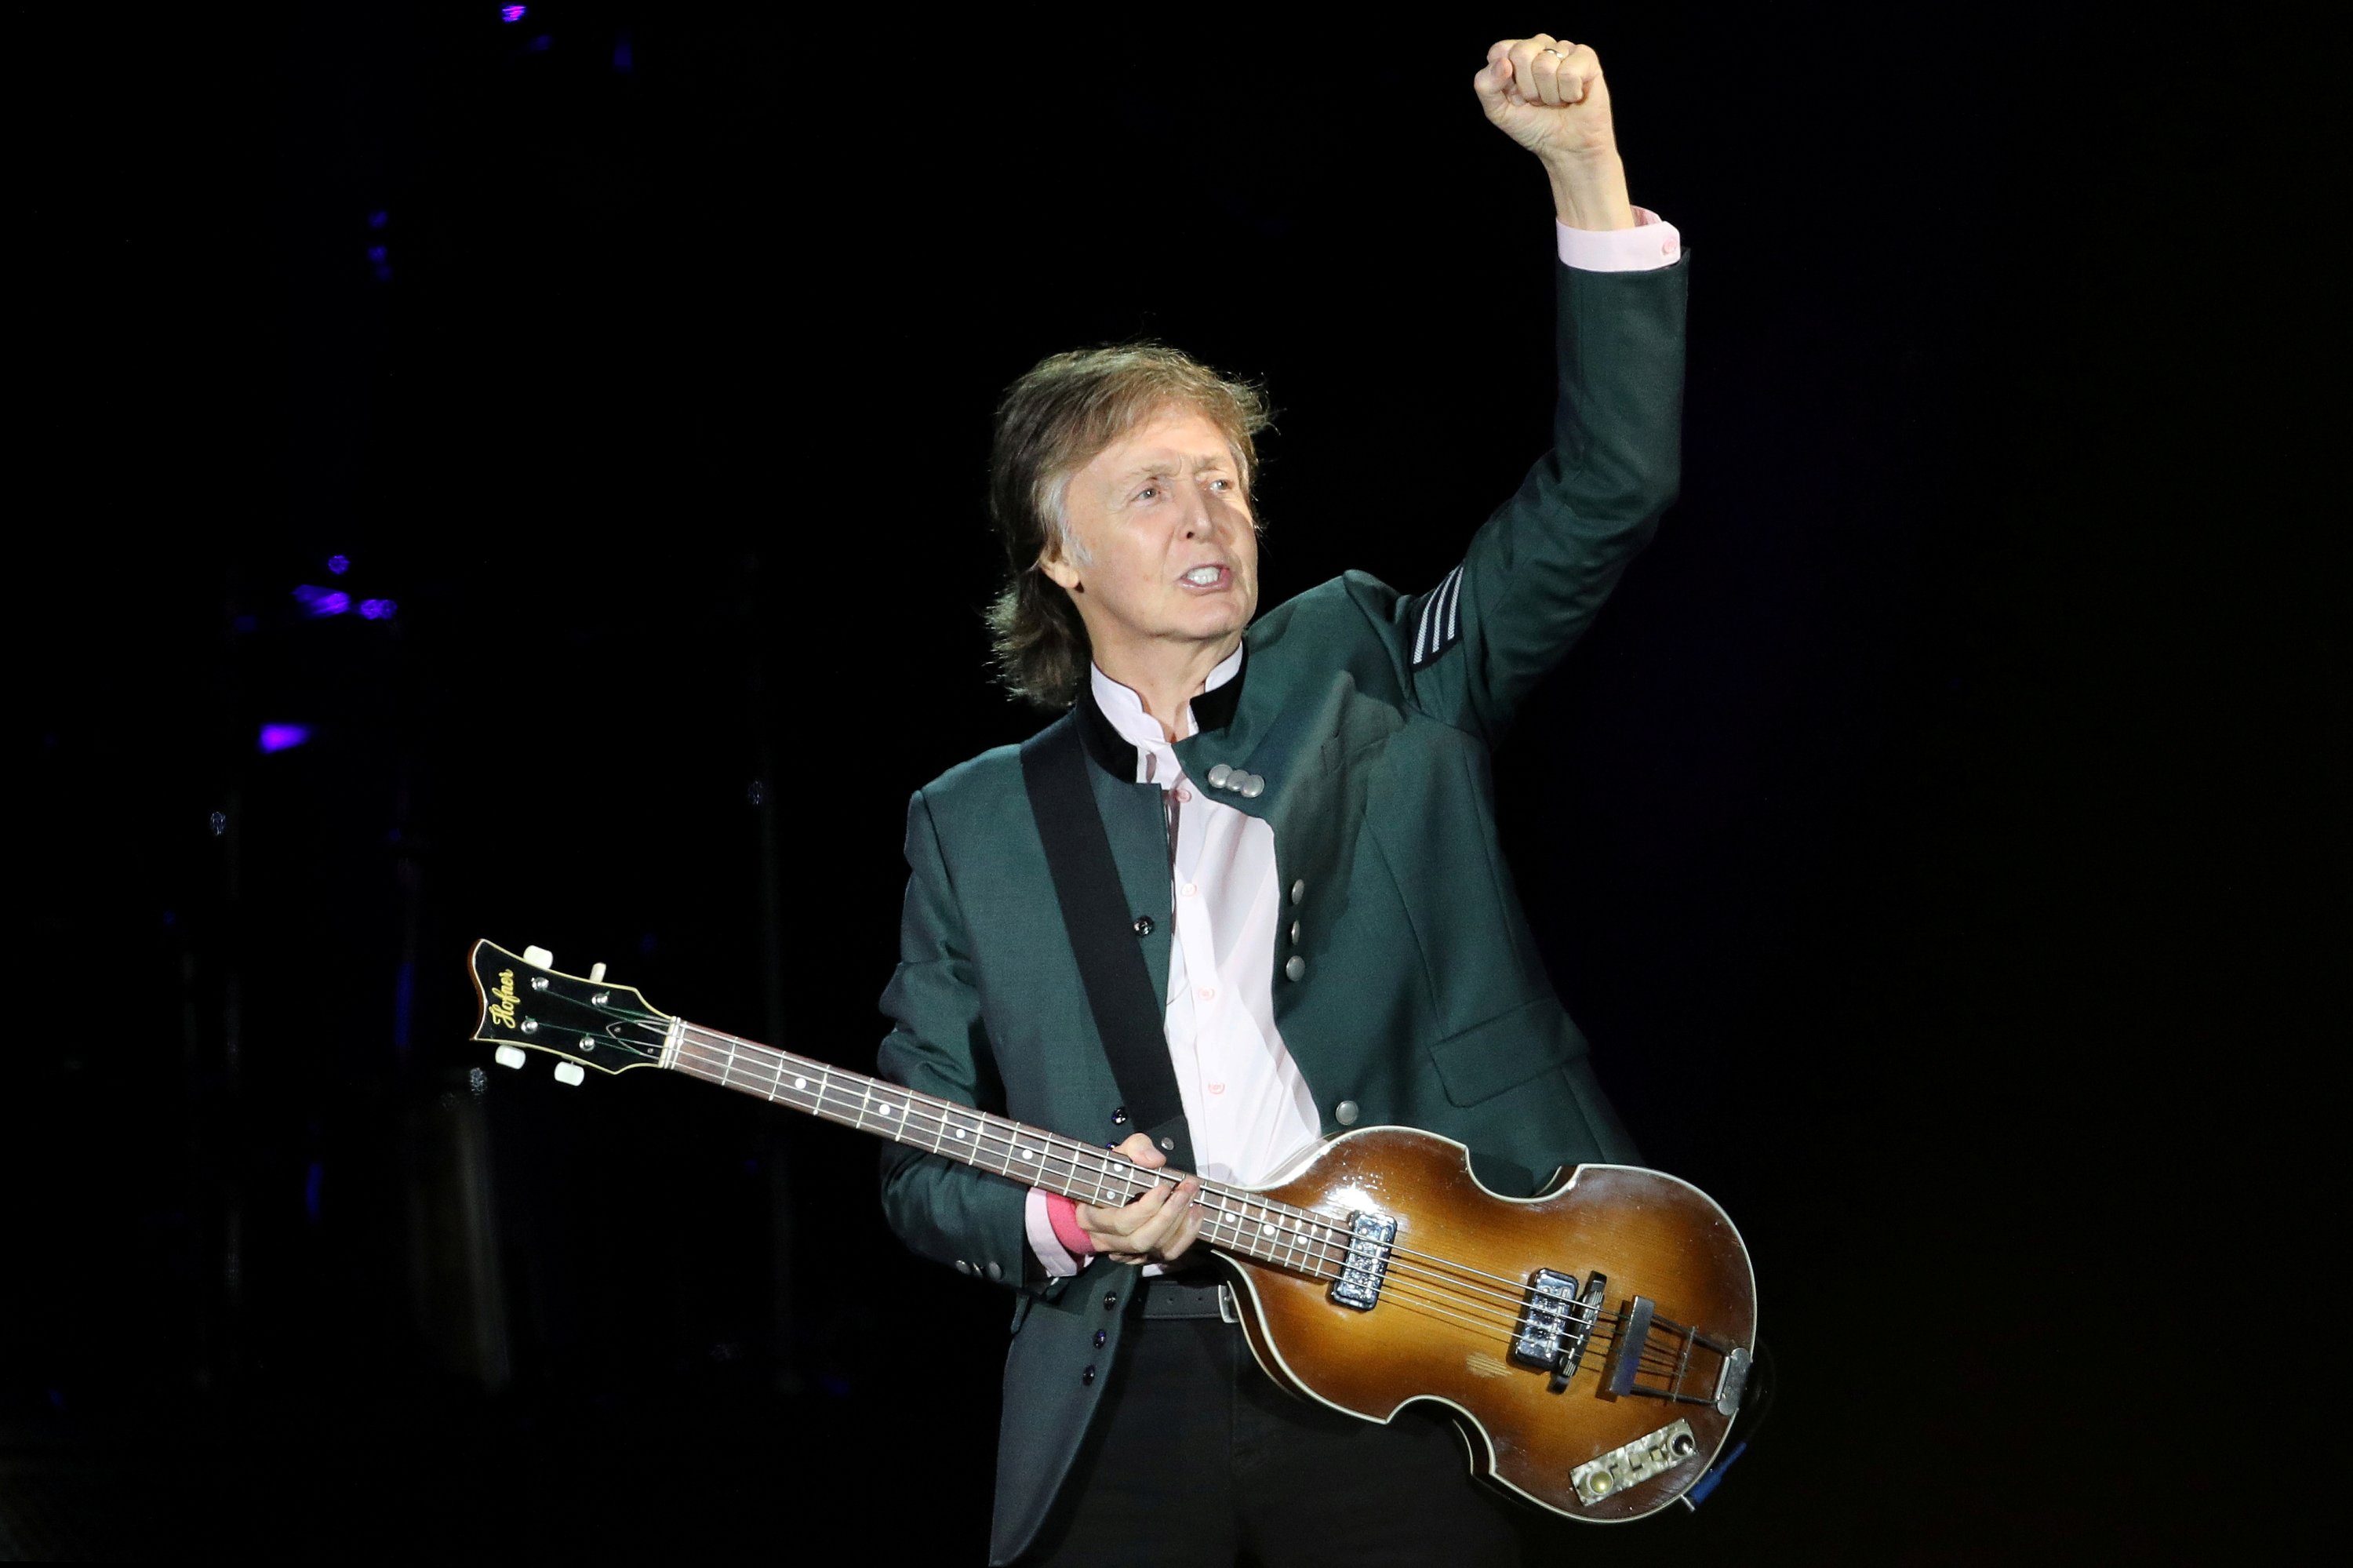 British musician Paul McCartney performs during the "One on One" tour concert in Porto Alegre, Brazil, Oct. 13, 2017. (Reuters Photo)